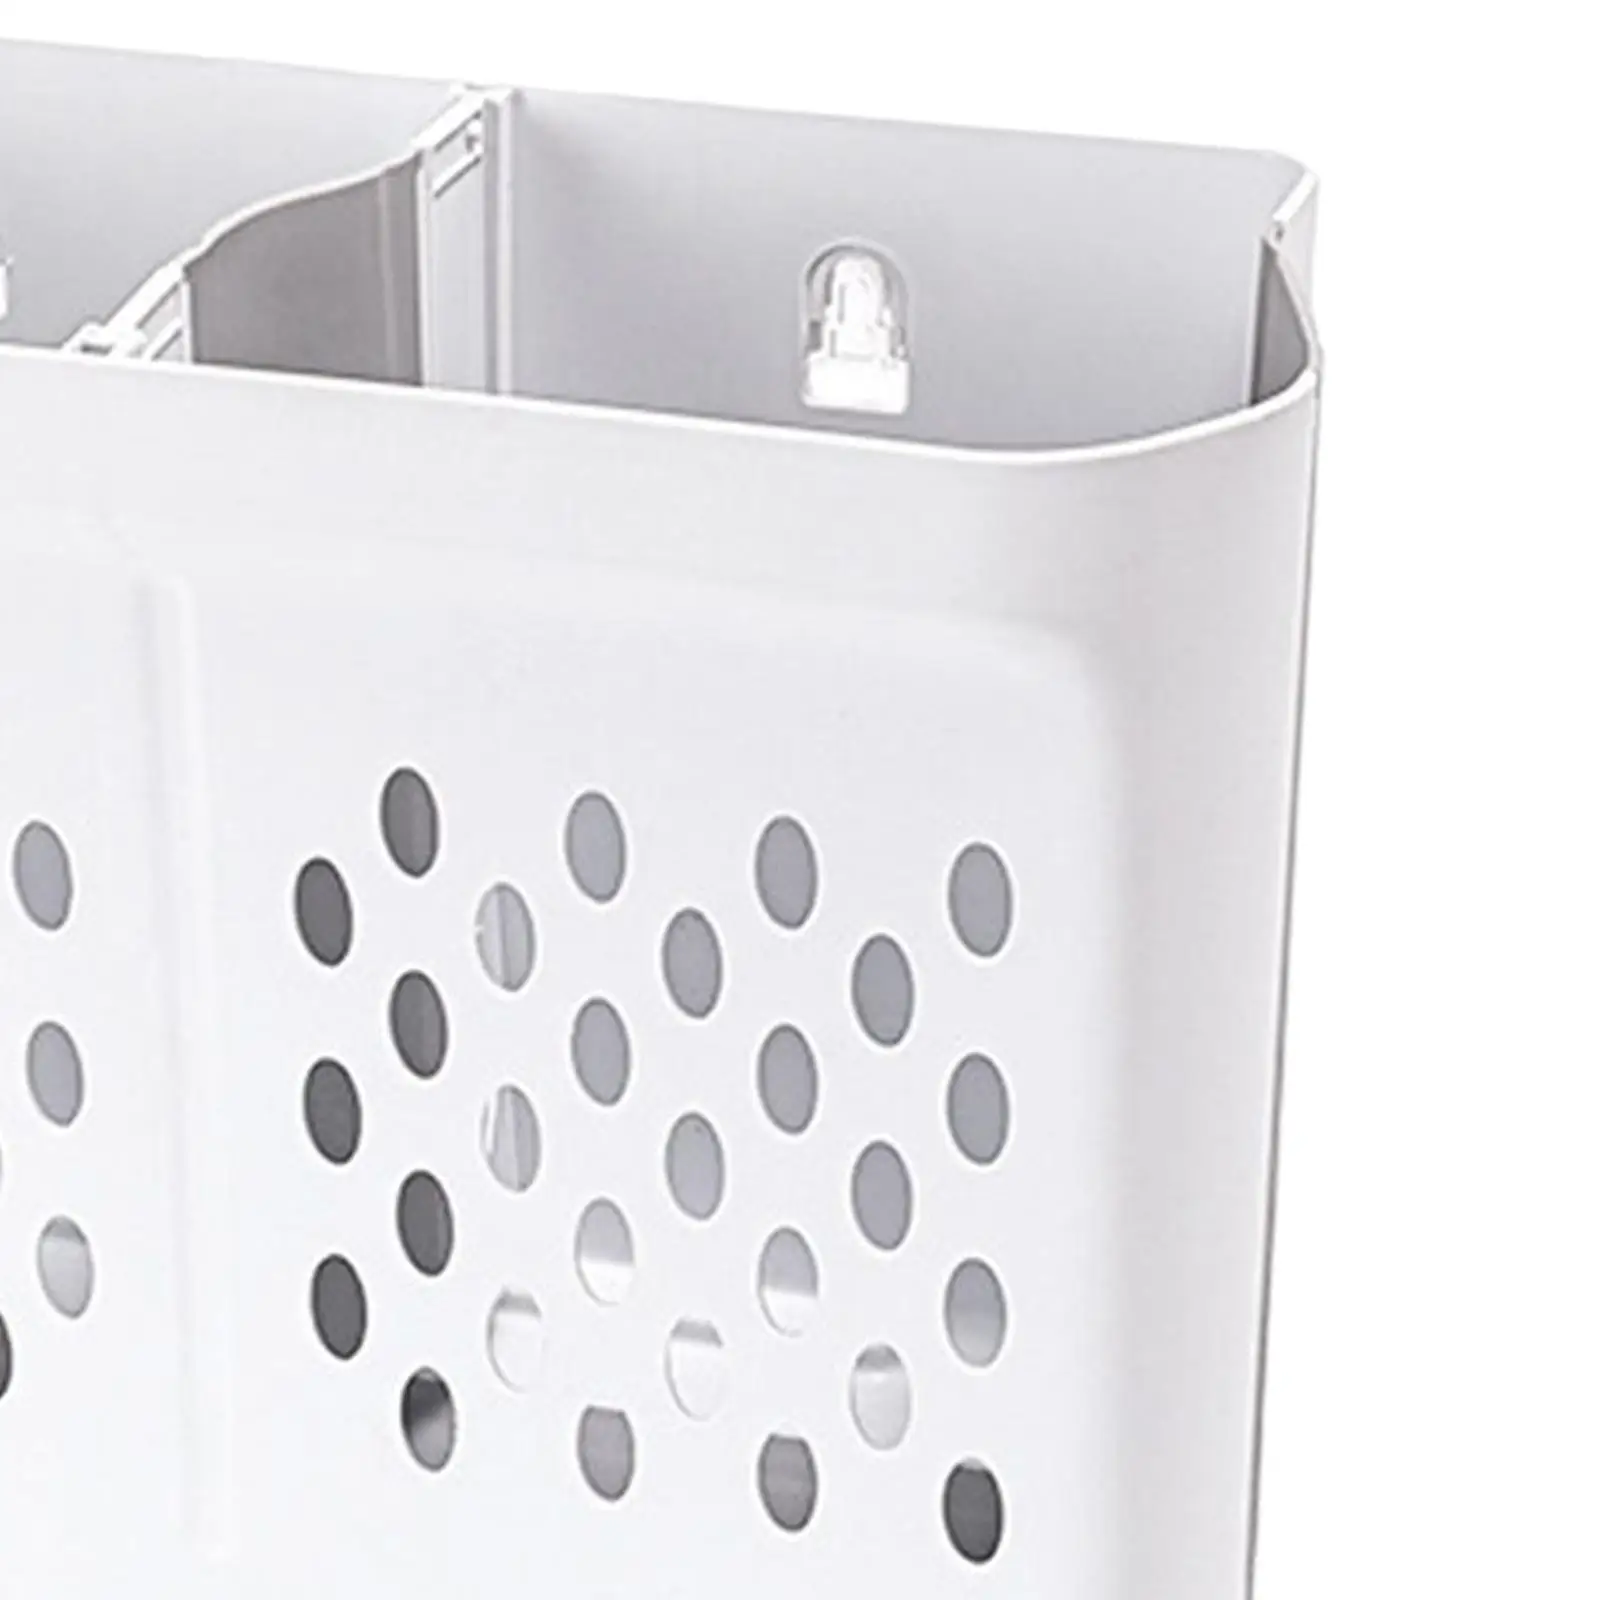 Folding Dirty Clothes Hamper Container Hanging Hollowed Out Space Saving Simple and Practical